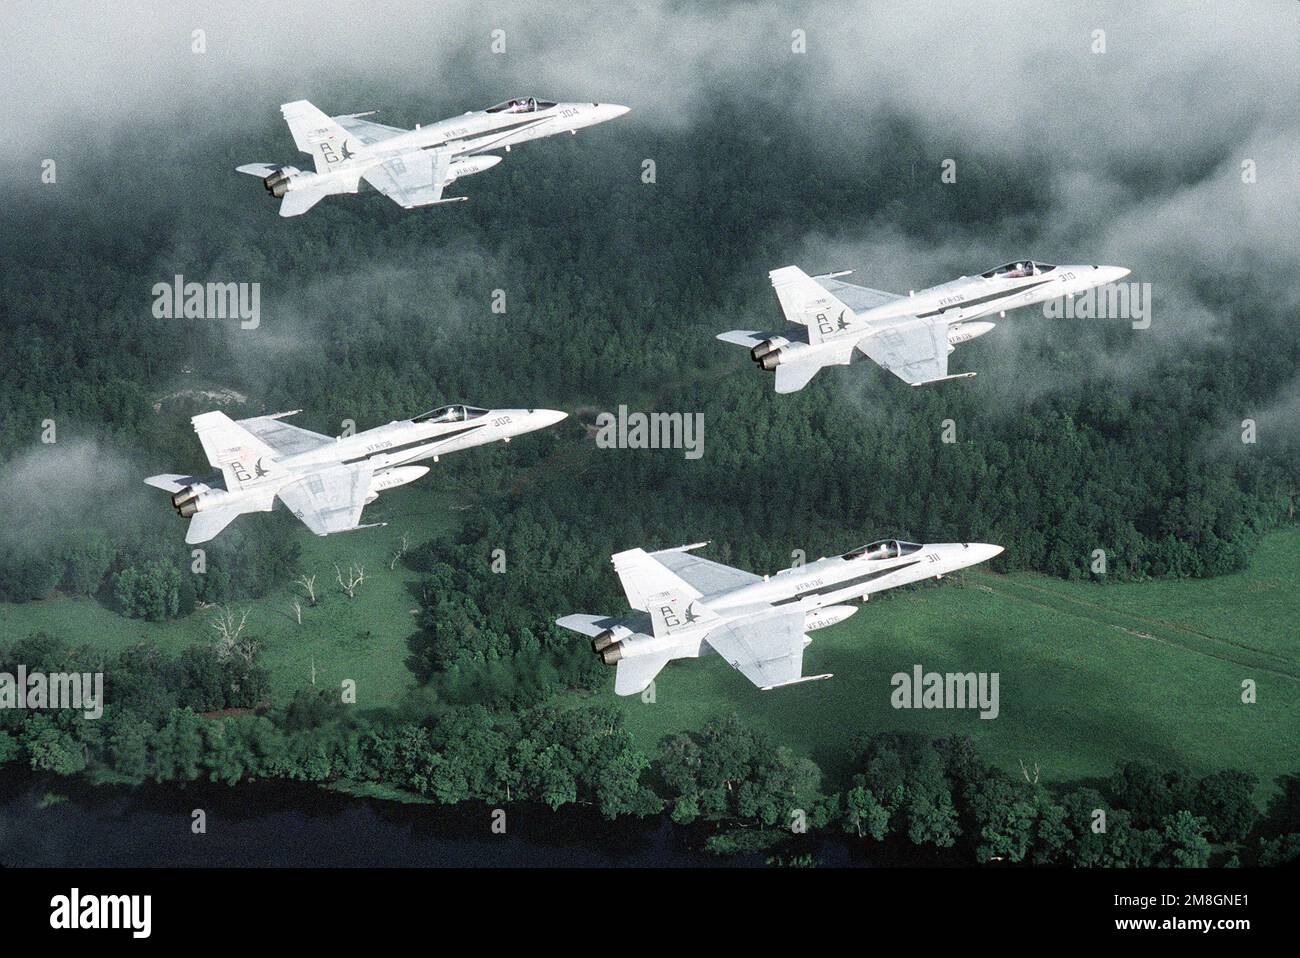 An air-to-air, right side view of four Strike Fighter Squadron 136 (VFA-136) F/A-18C Hornet aircraft flying in a diamond formation. Country: Unknown Stock Photo